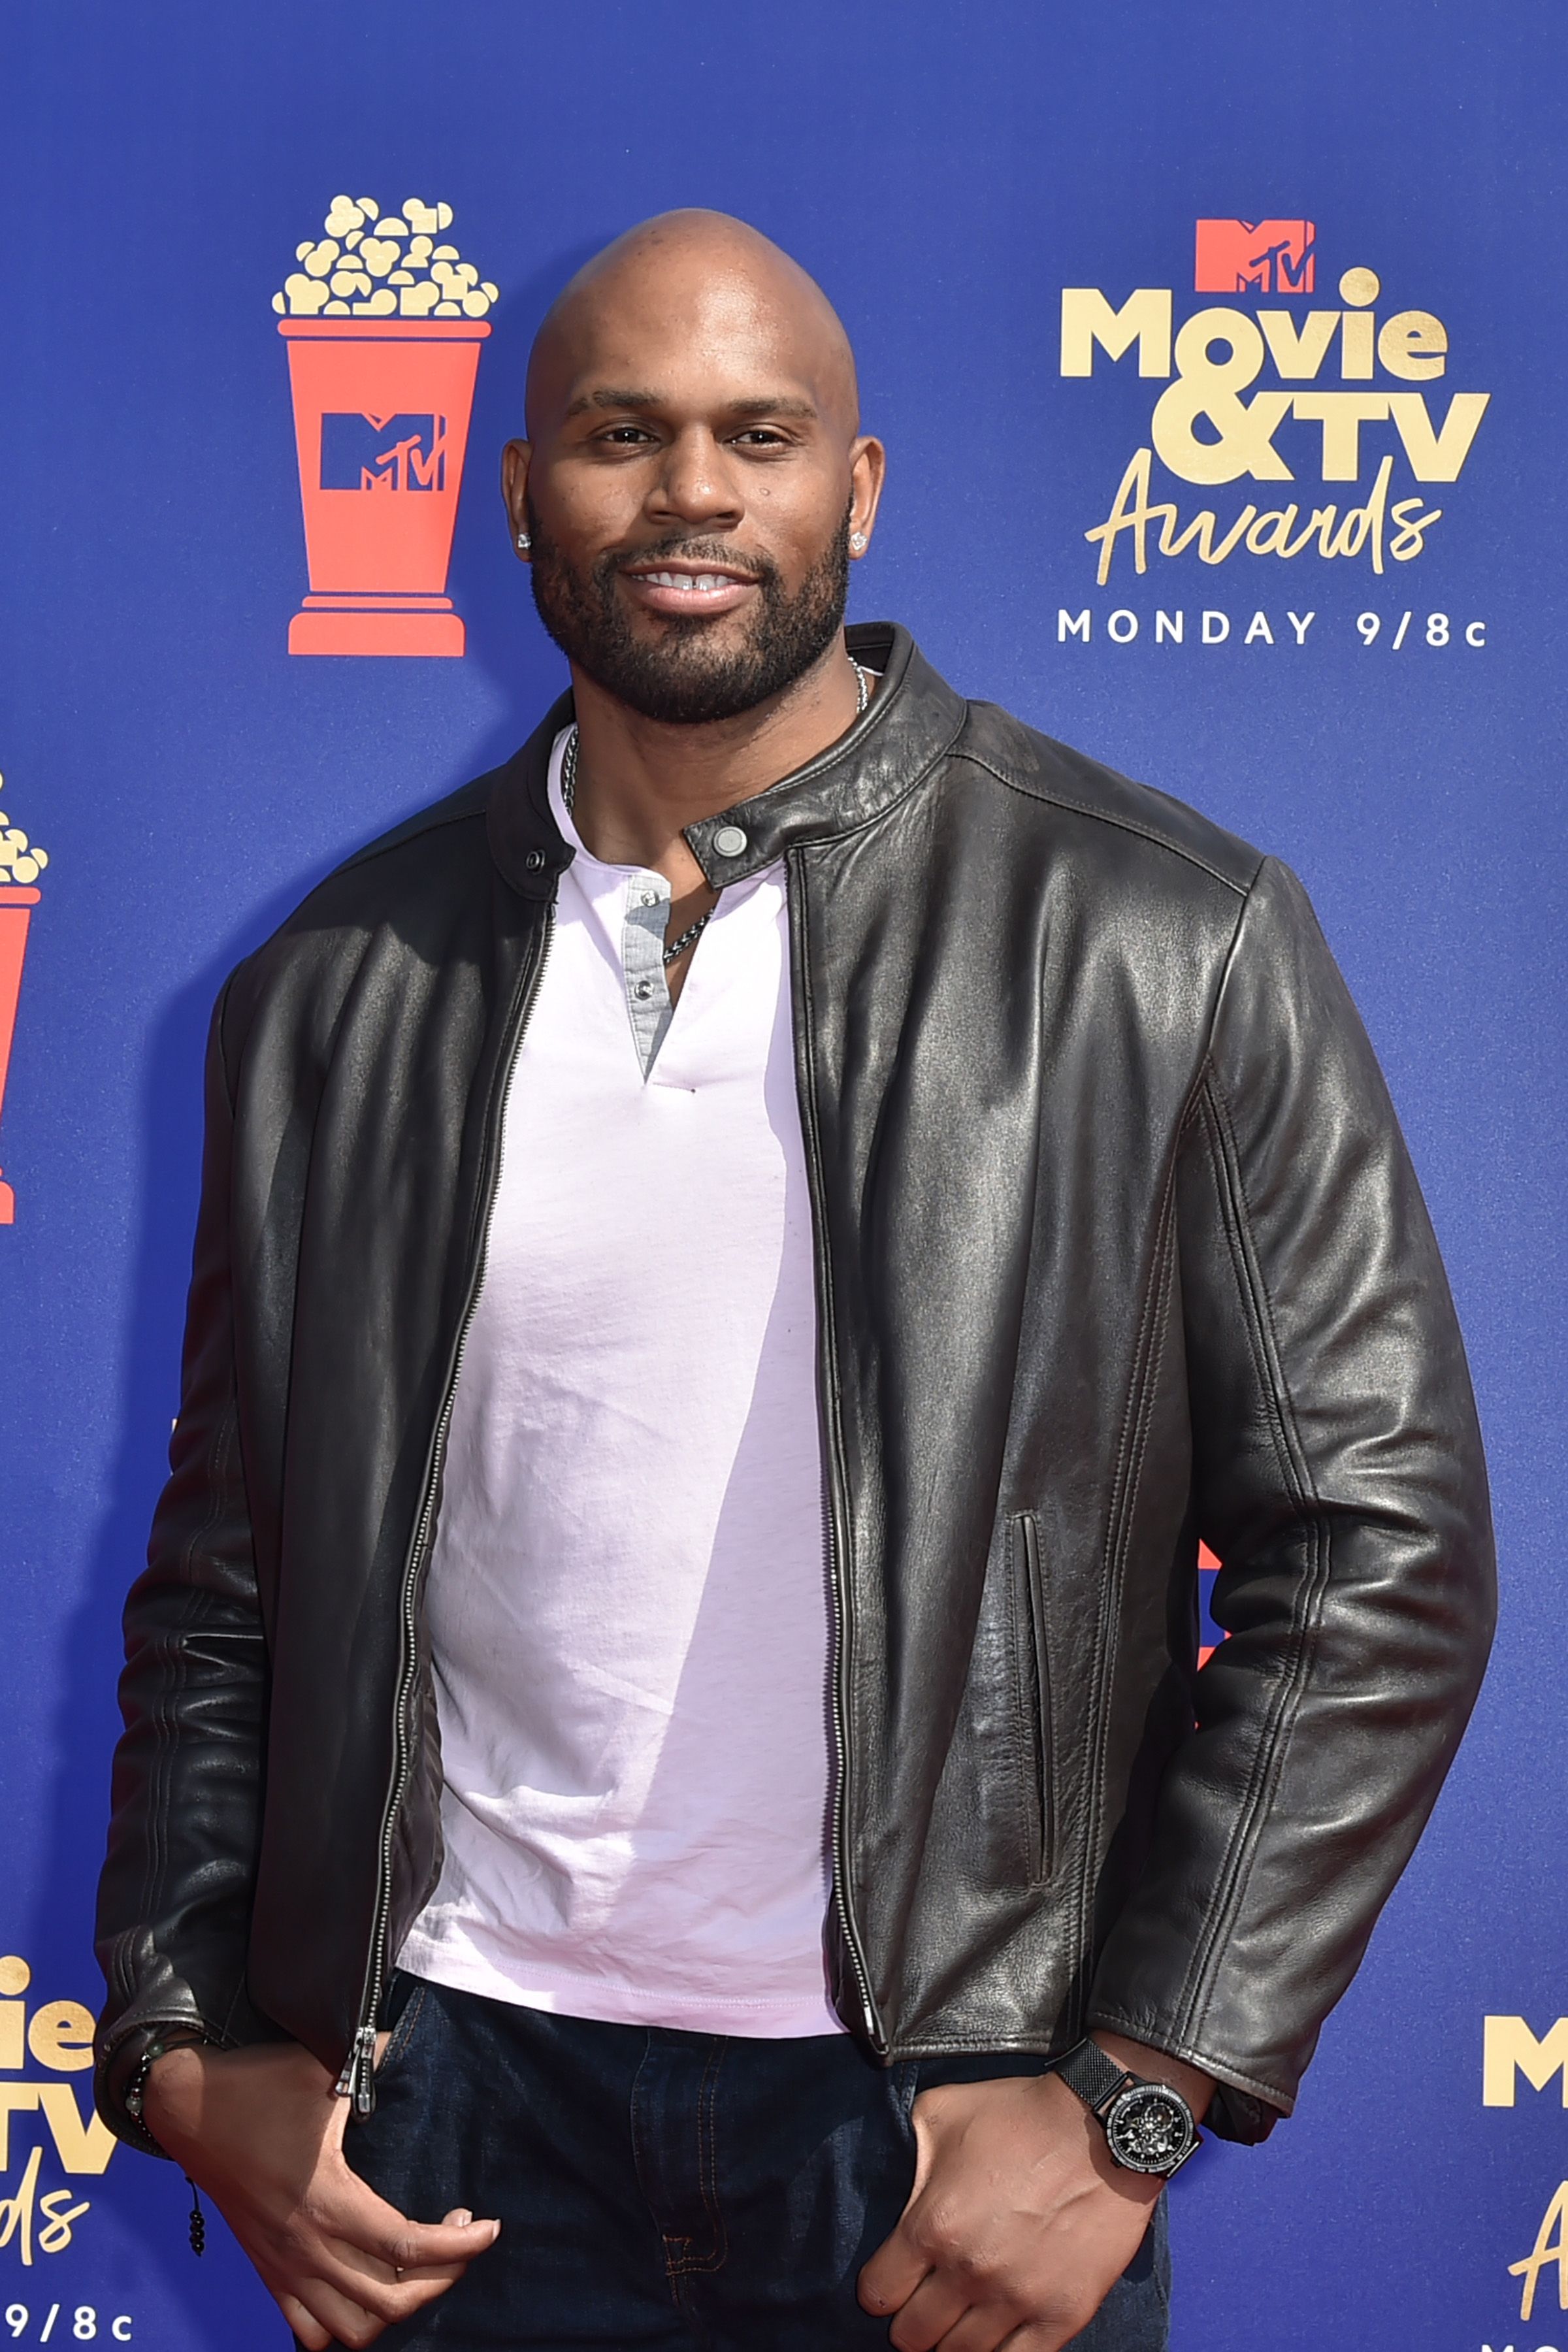 Shad Gaspard at the 2019 MTV Movie & TV Awards on June 15, 2019 in Santa Monica, California | Photo: Getty Images